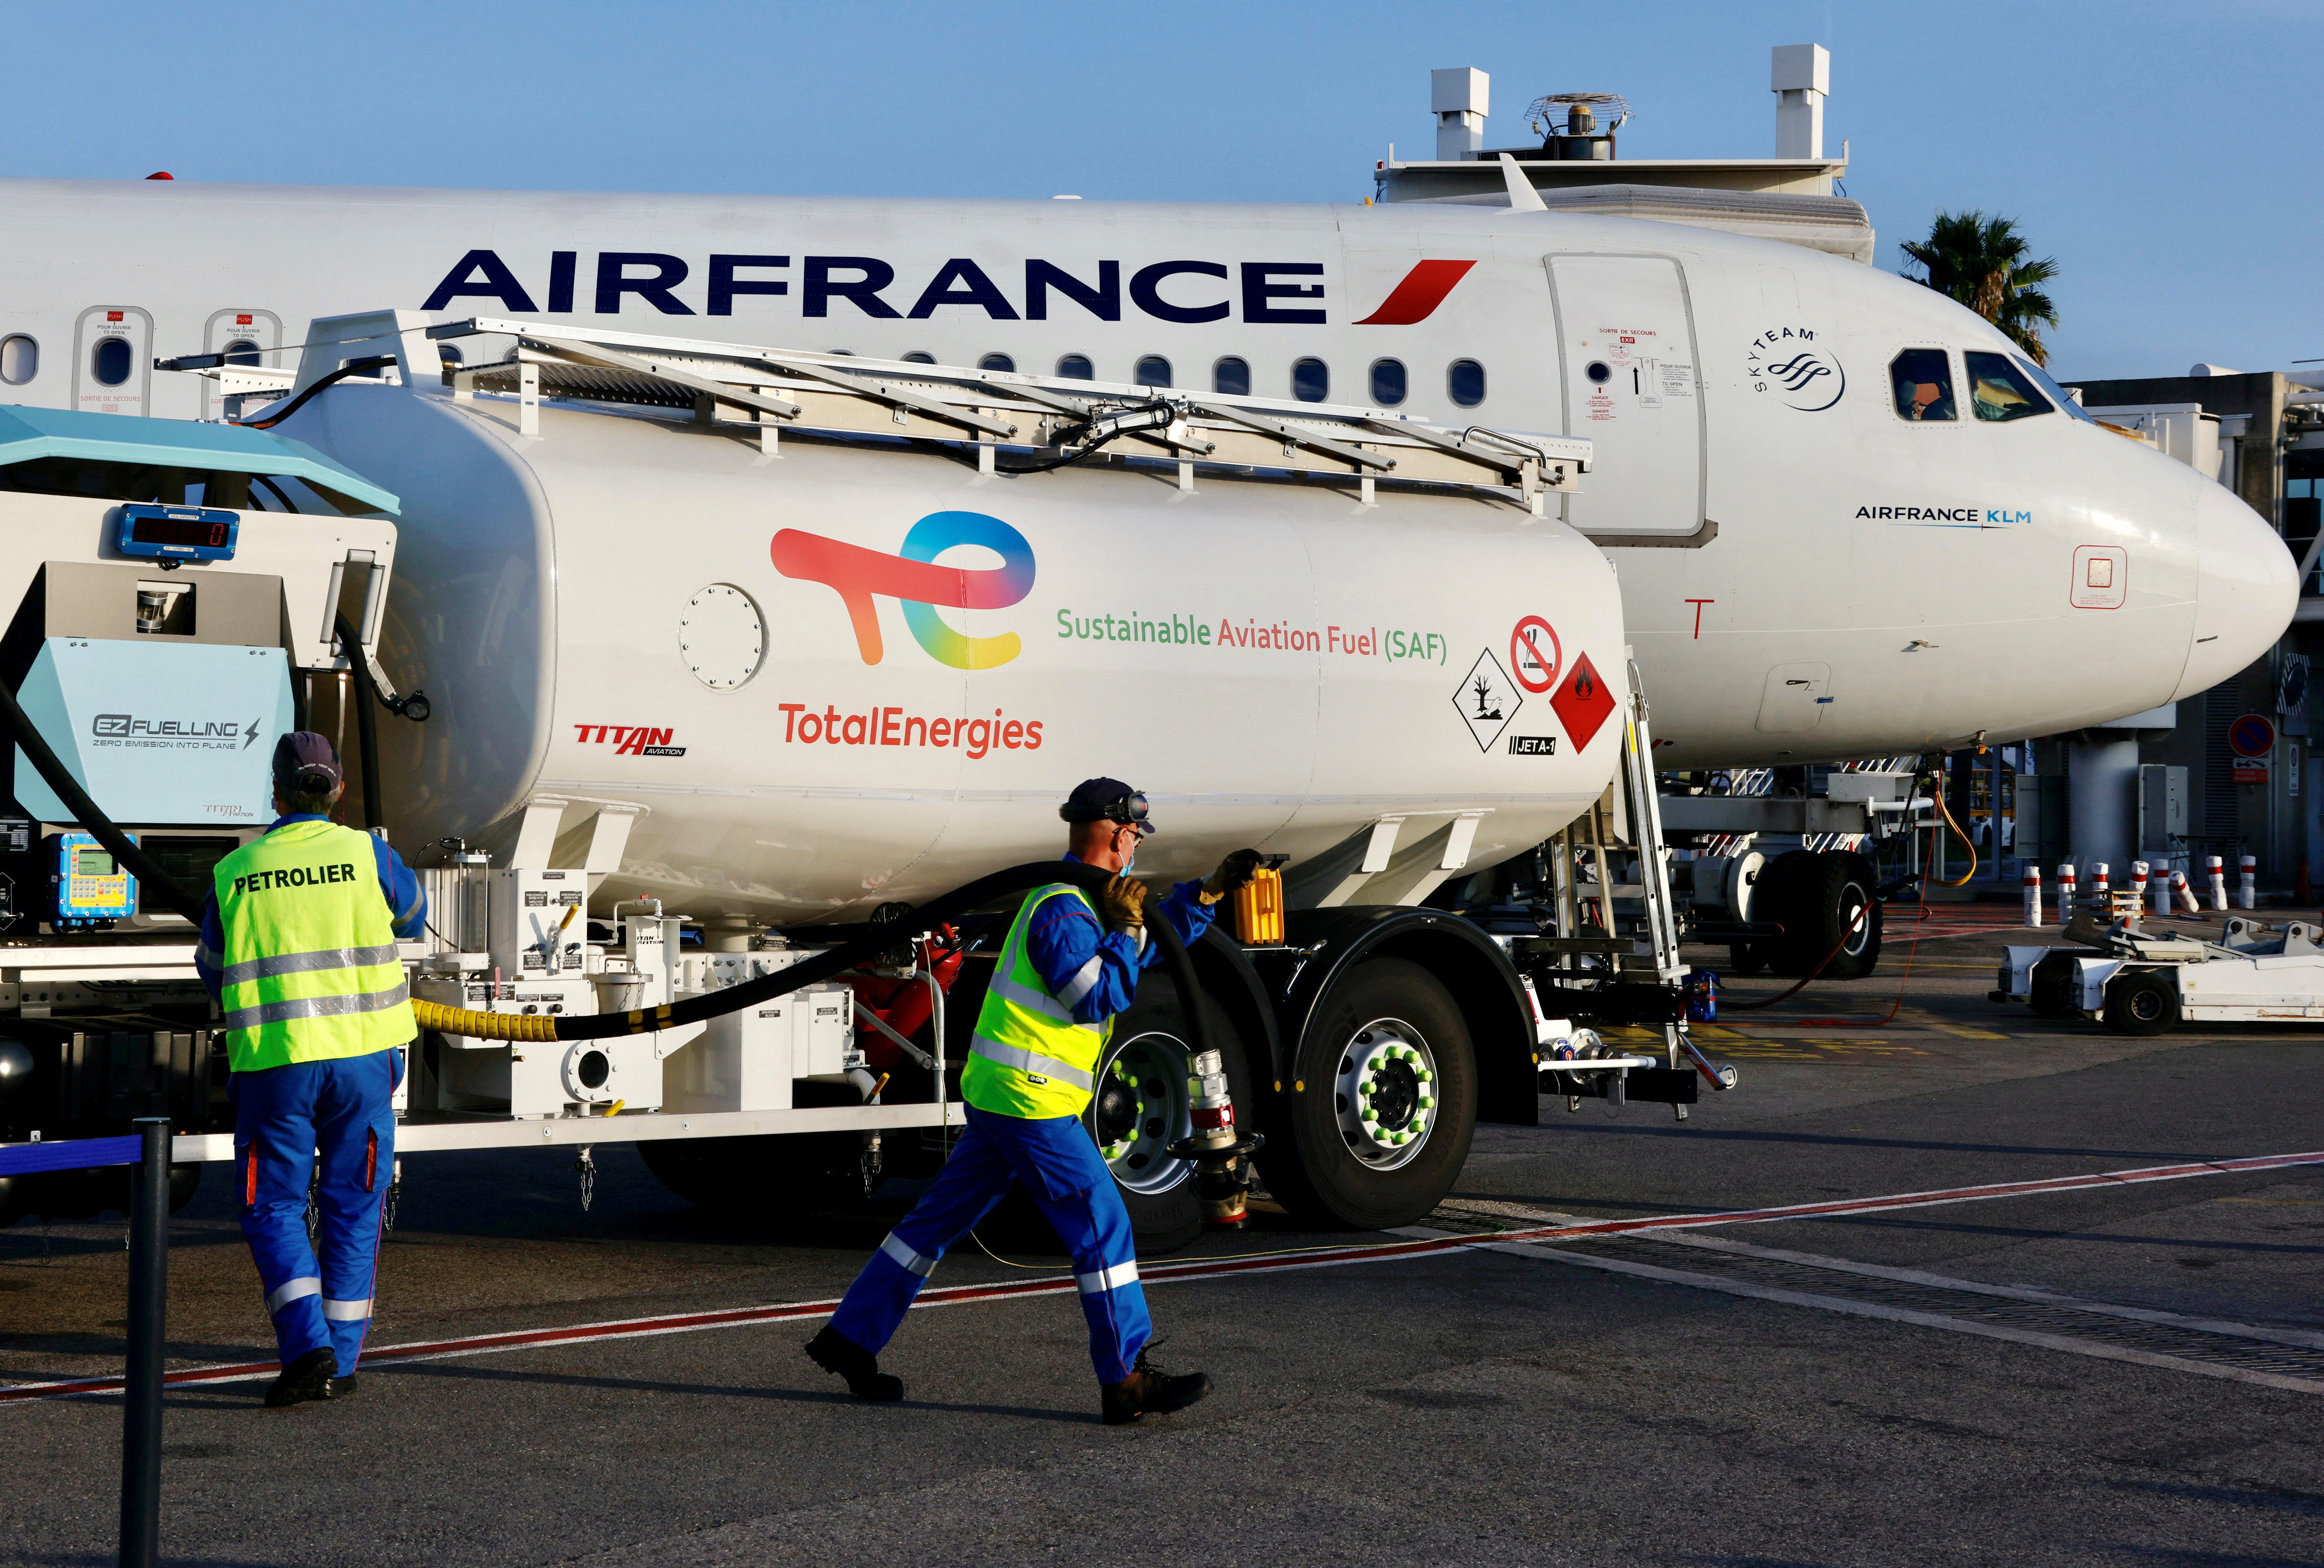 France Considers Taxing Private Jet Use in Fight Against Climate